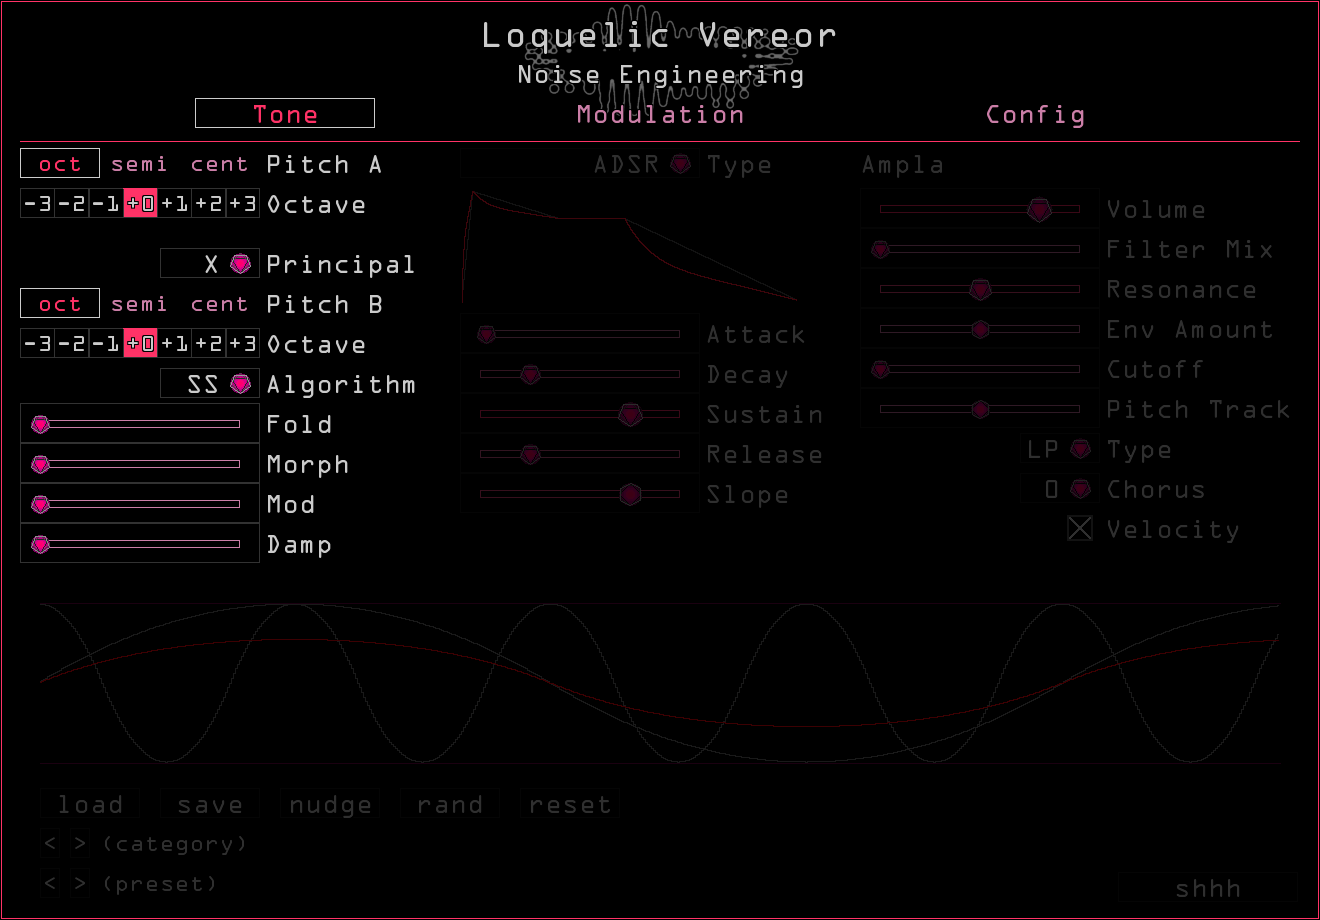 Loquelic Vereor's timbre controls highlighted